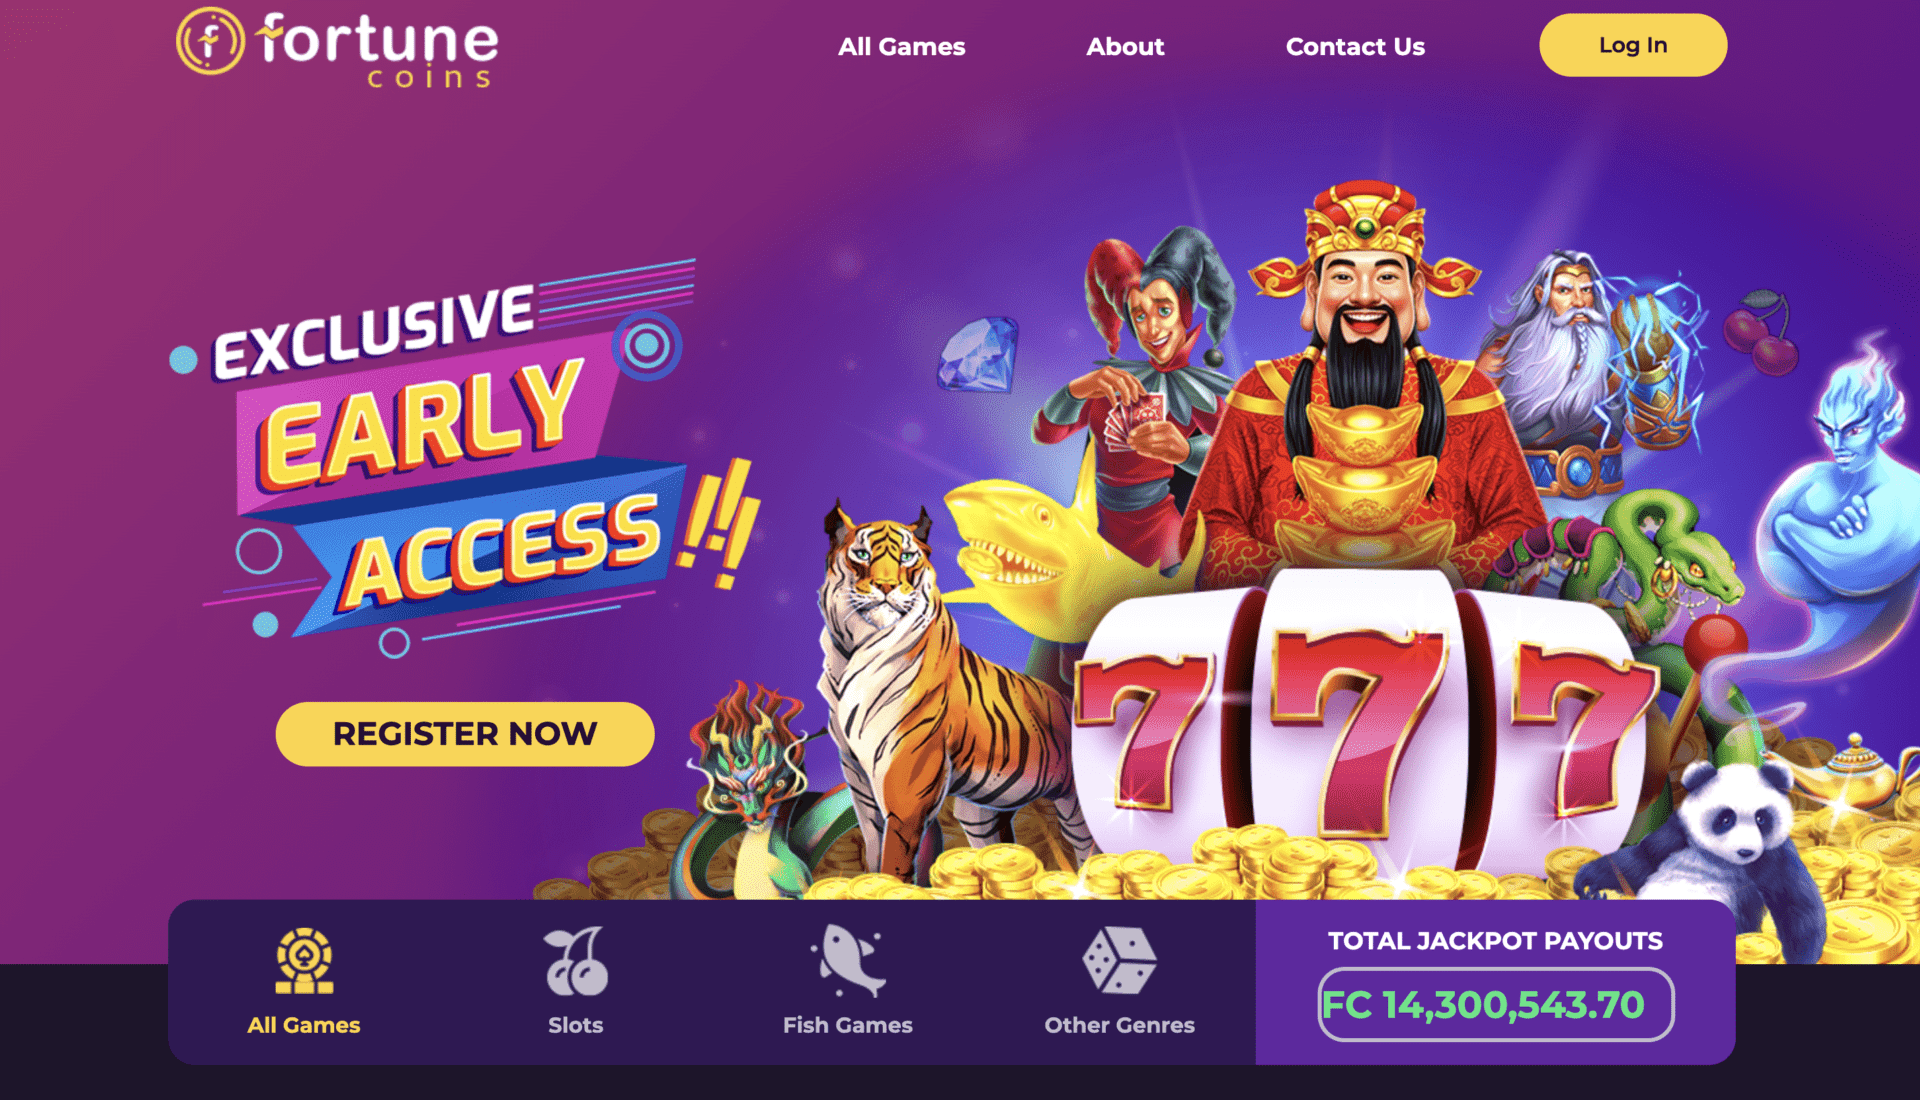 Fortune coins homepage